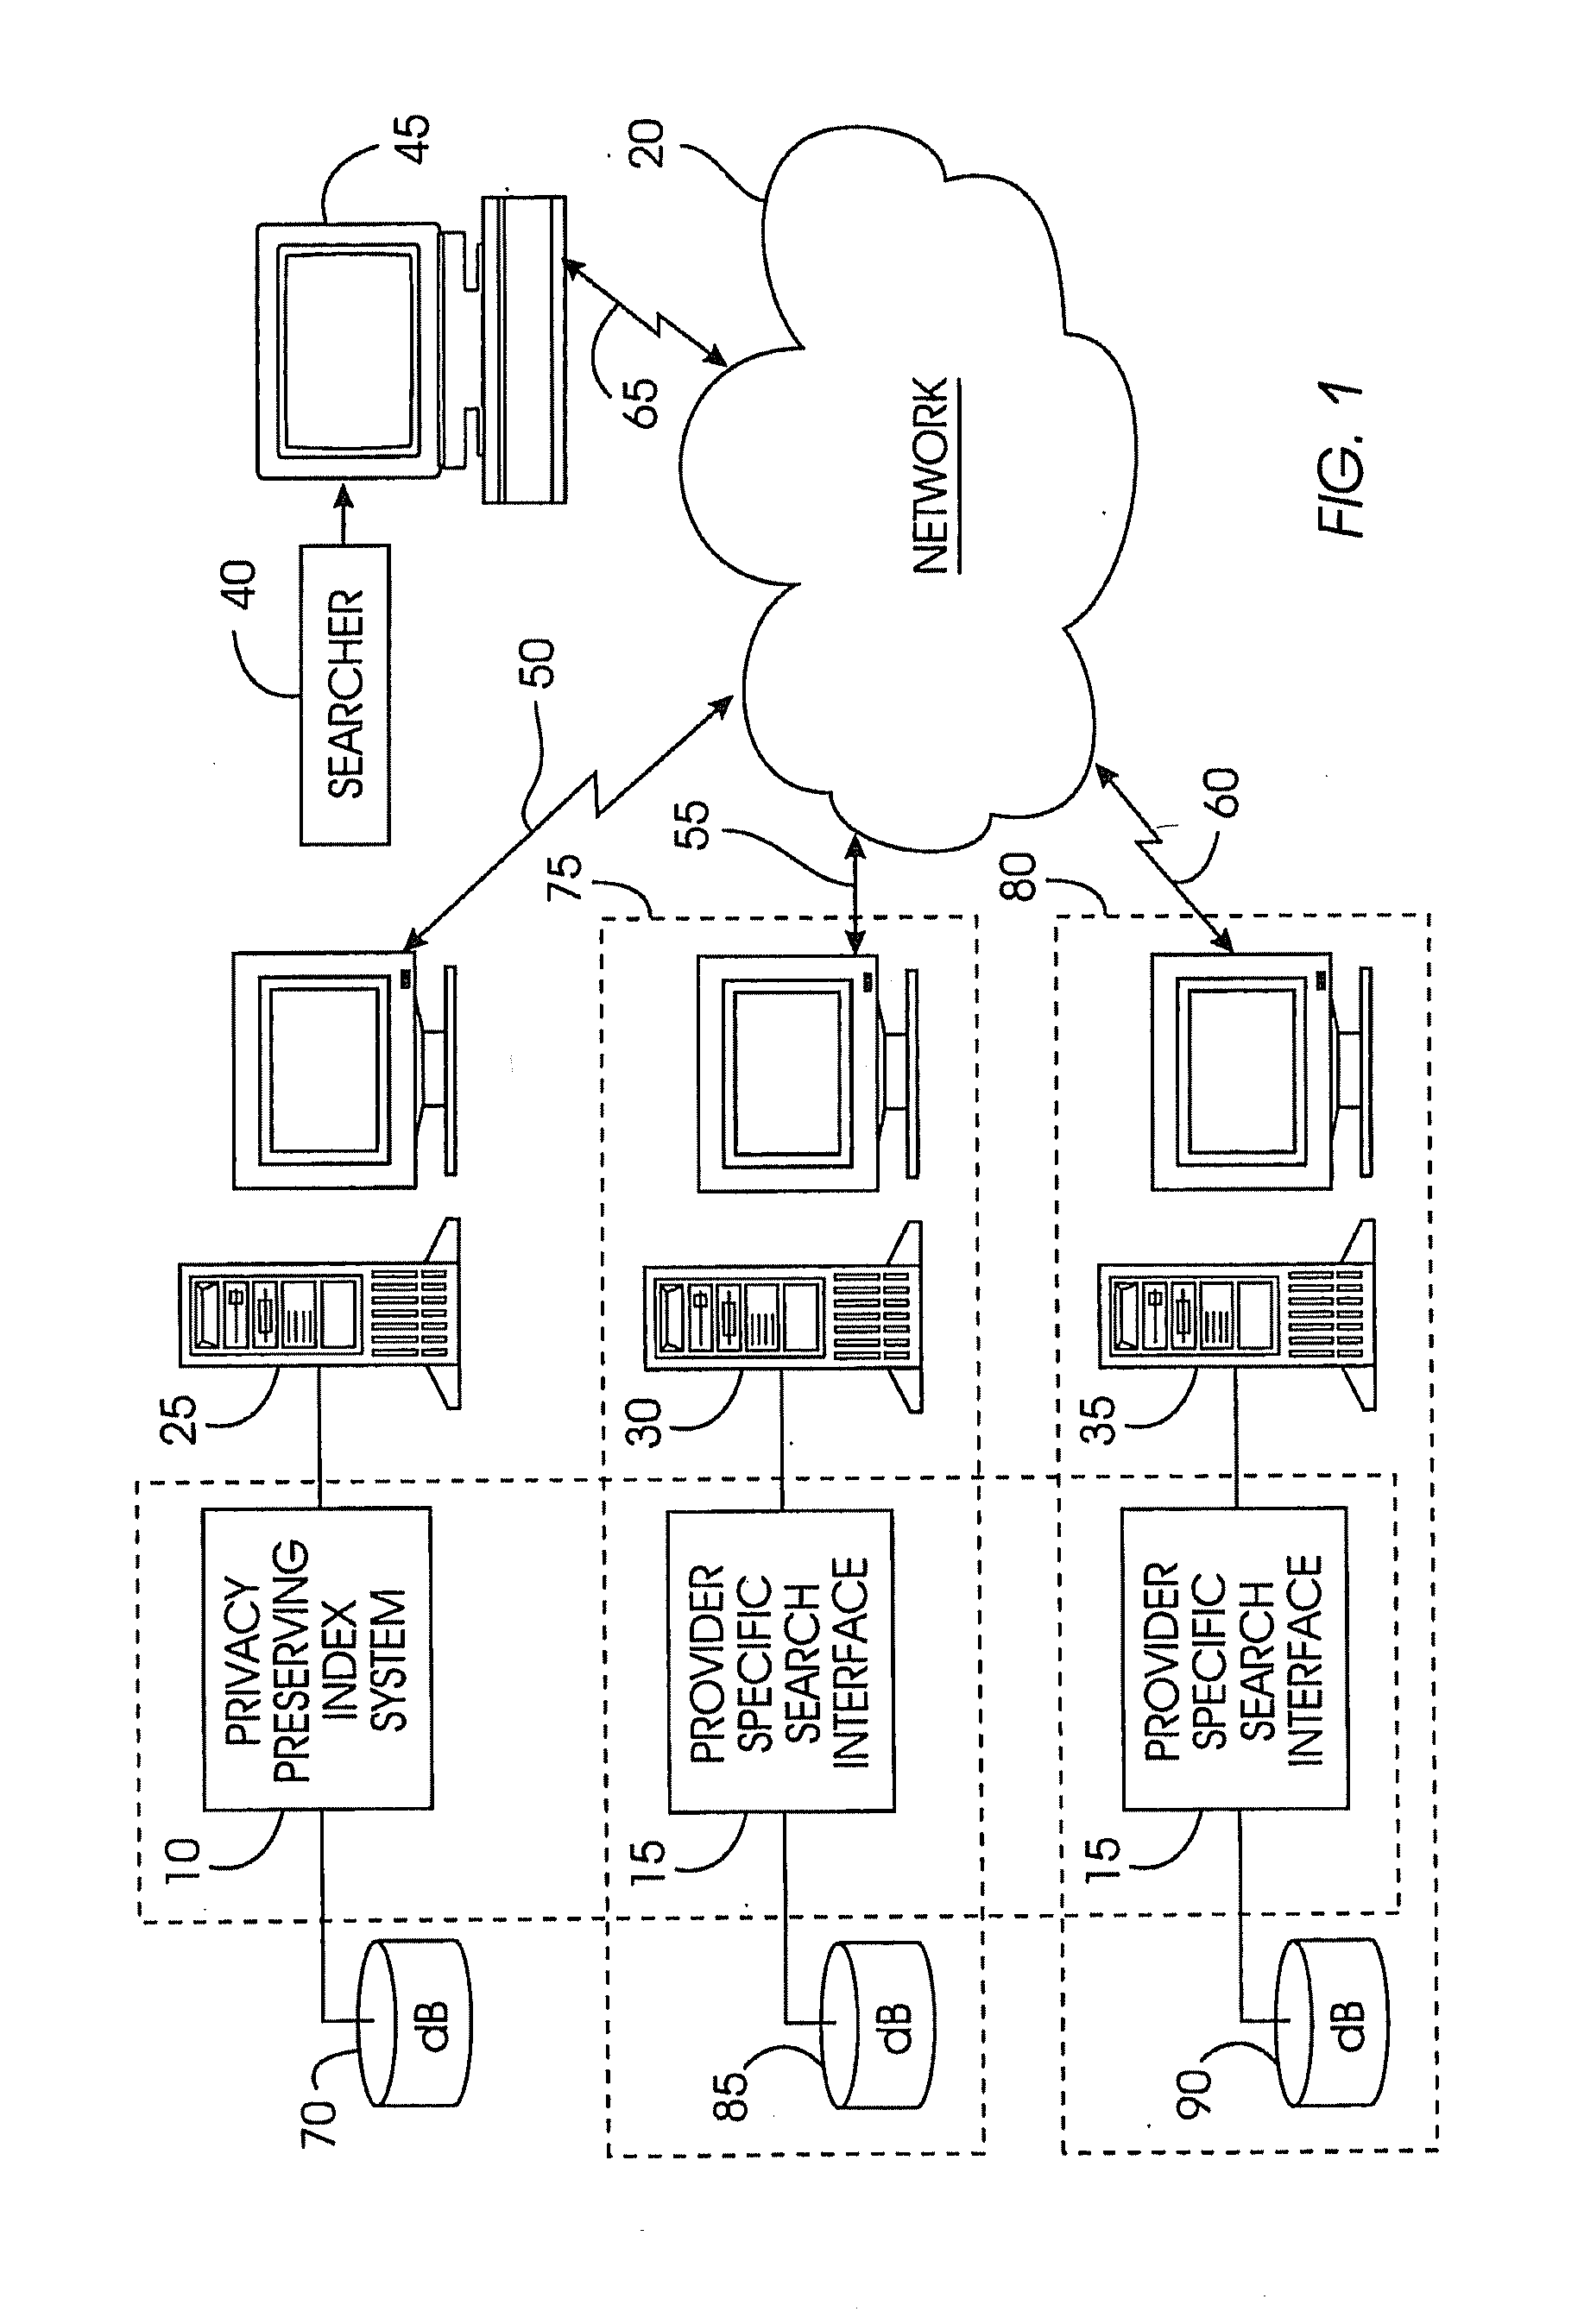 Uniform search system and method for selectively sharing distributed access-controlled documents